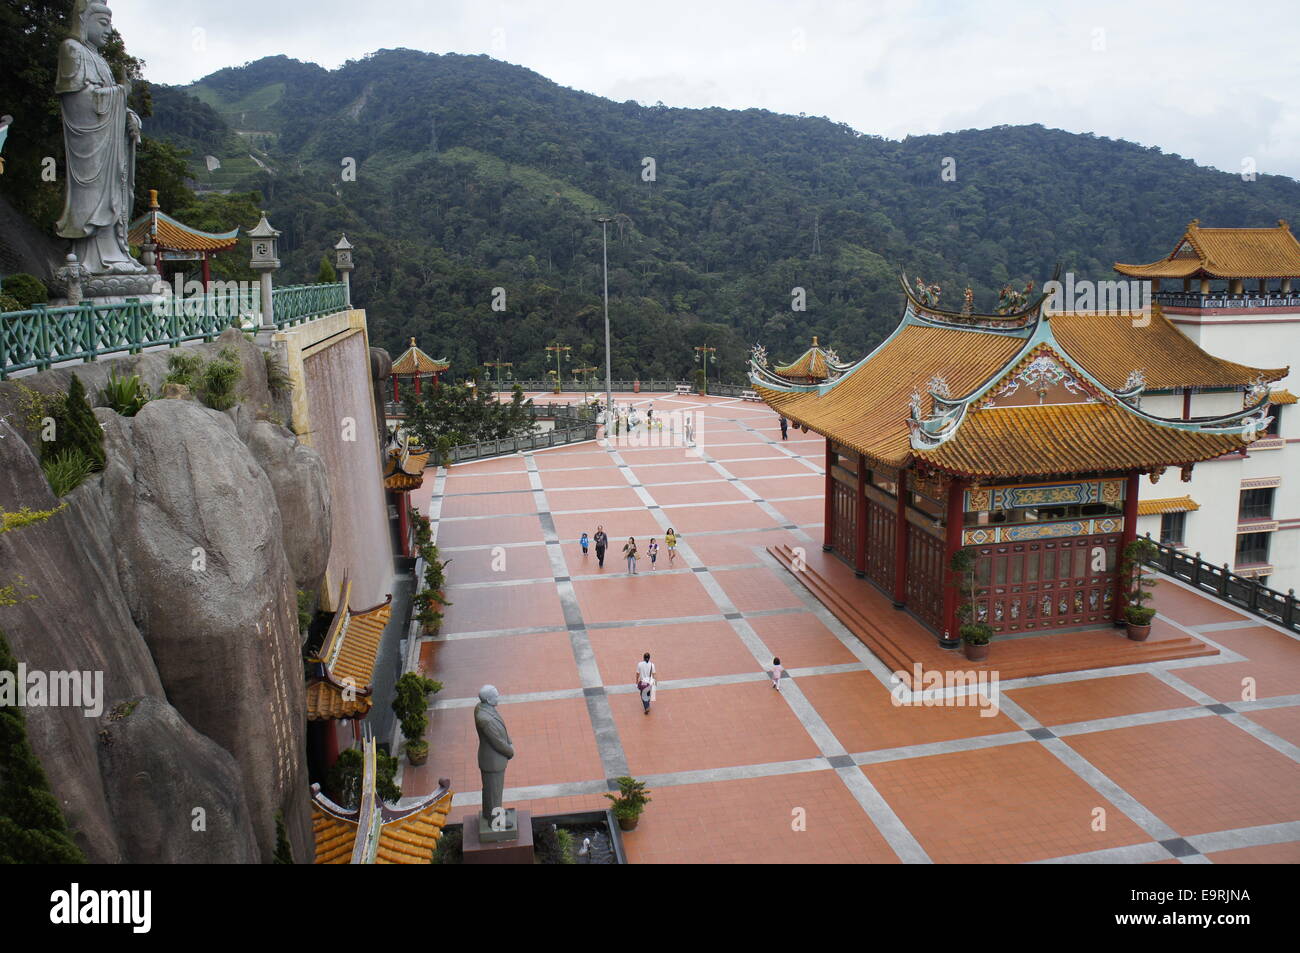 Chin Swee temple, Genting Highlands, Malaysia Stock Photo